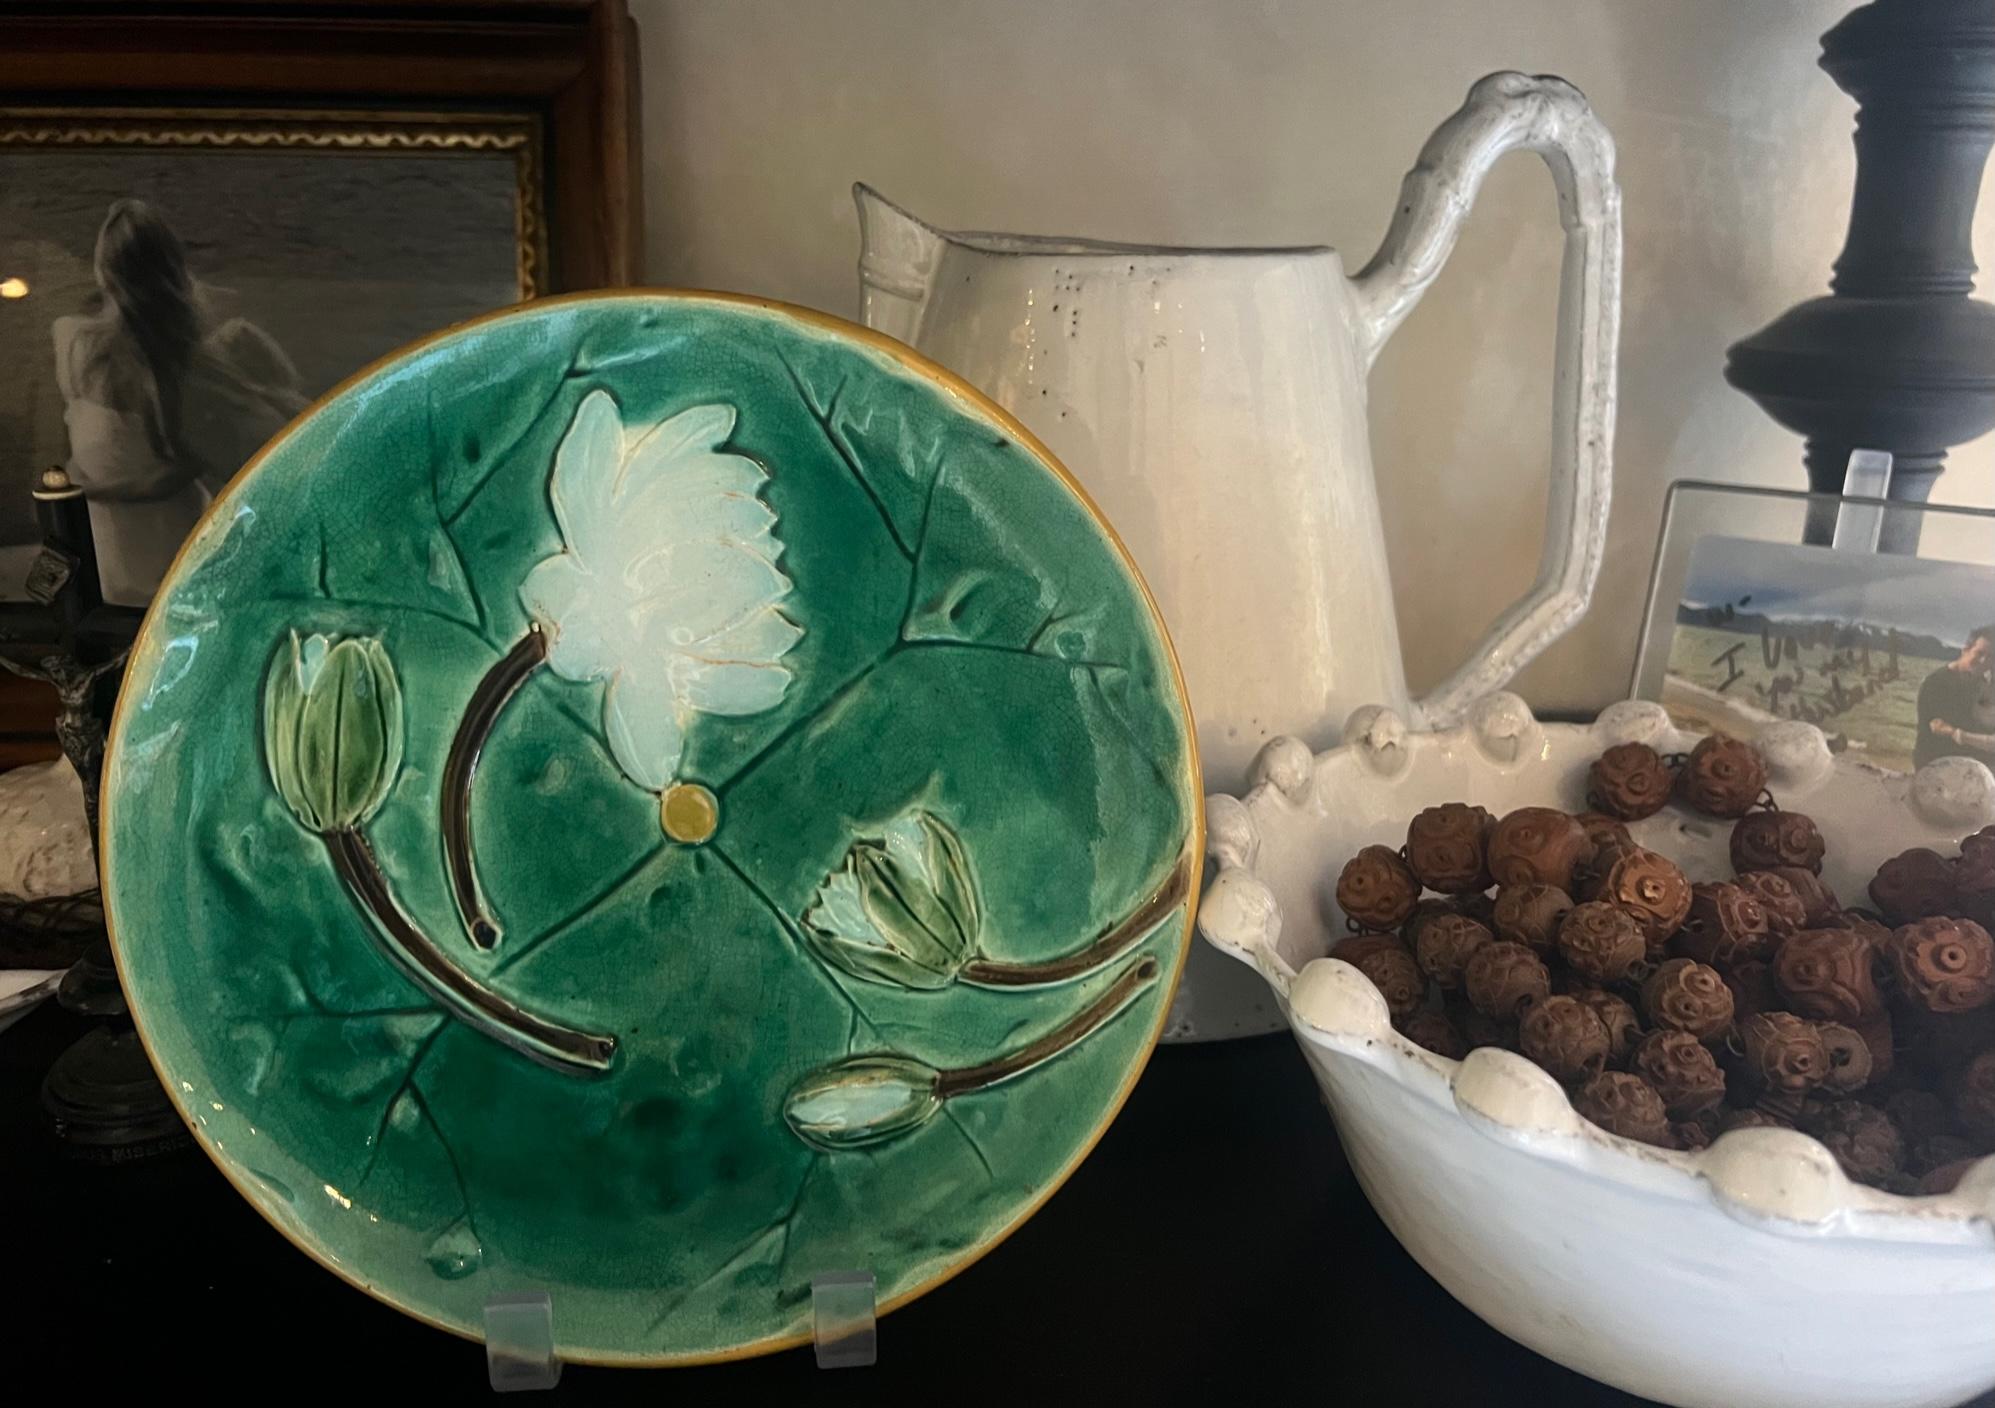 Antique majolica pond lily plate, made by Joseph Holdcraft around 1885 in England.  A vibrant green plate with pond lily flowers and a yellow boarder.  Hallmarked on the underside with the JH in a circle mark indicating Joseph Holdcraft.